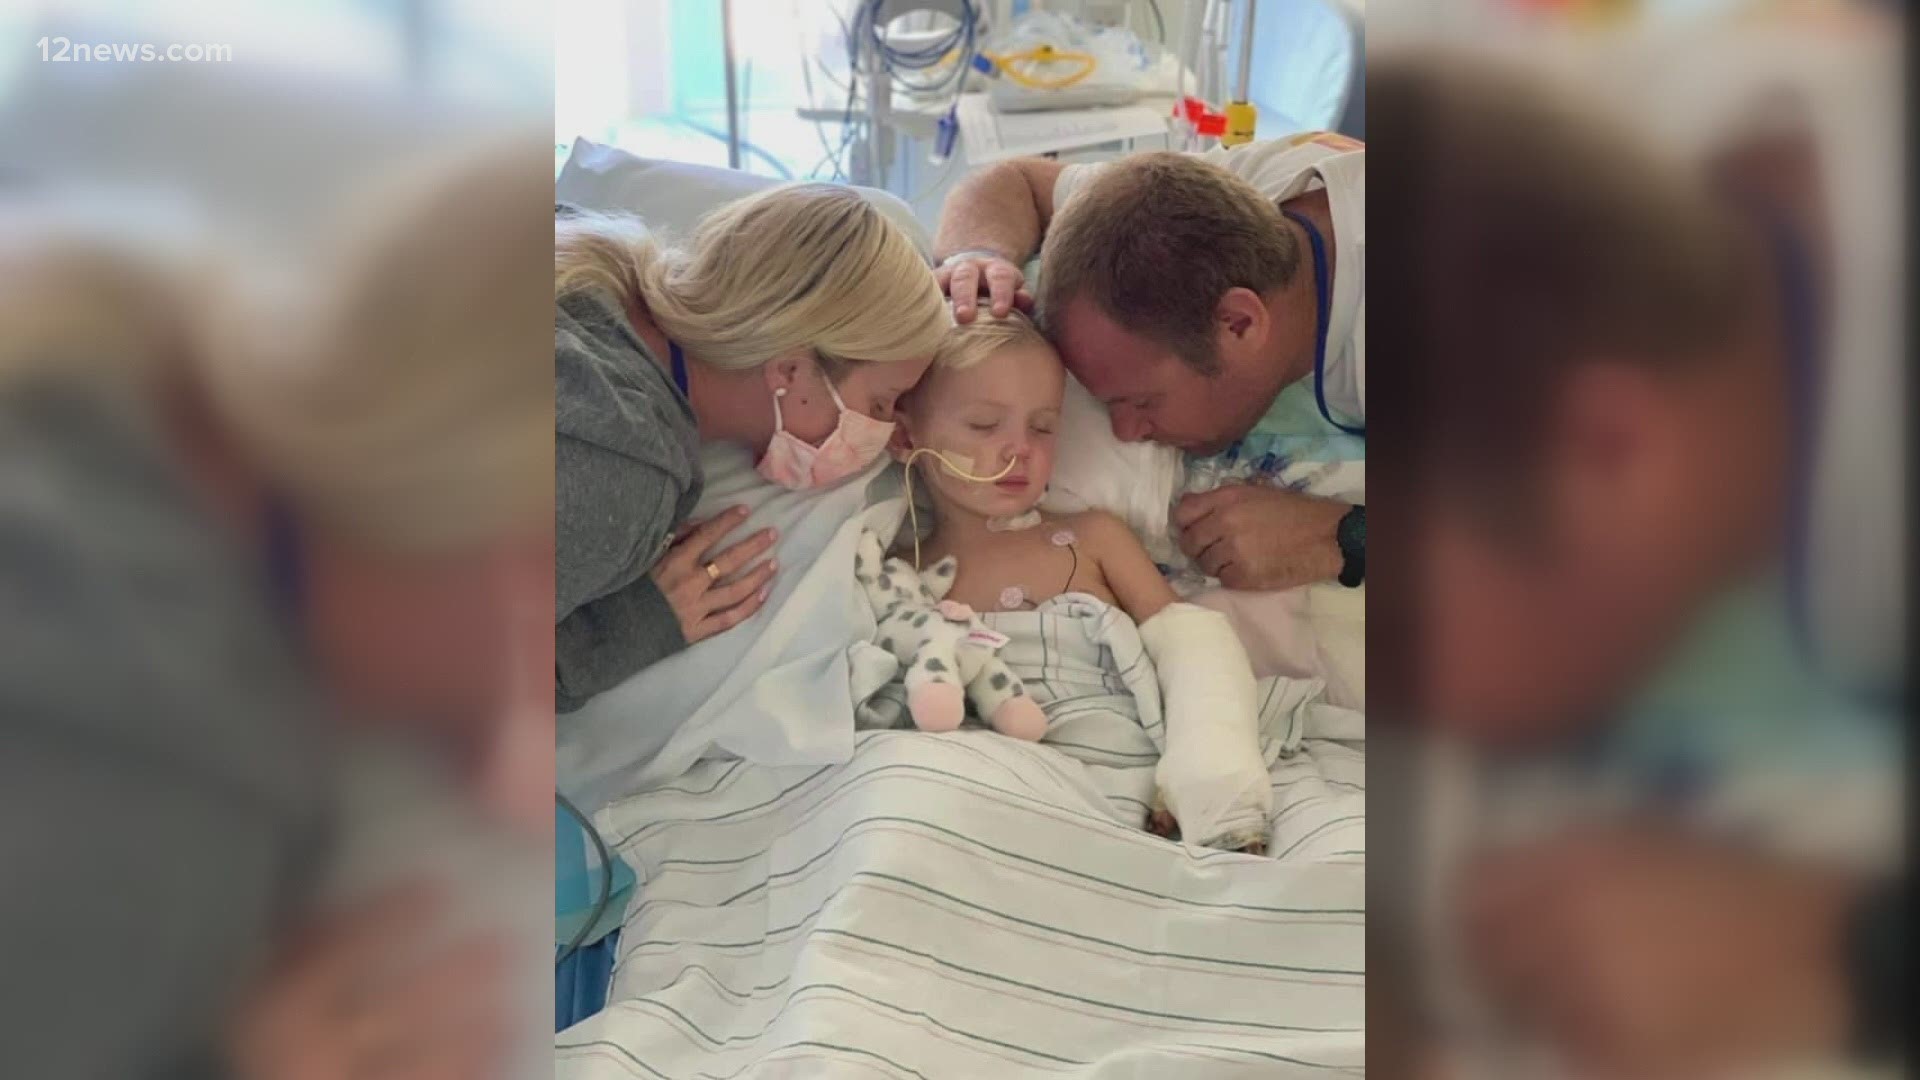 An Arizona family's vacation in San Diego turned into a medical nightmare. A scrape on 3-year-old Beauden's got infected forcing doctors to amputate both of his legs